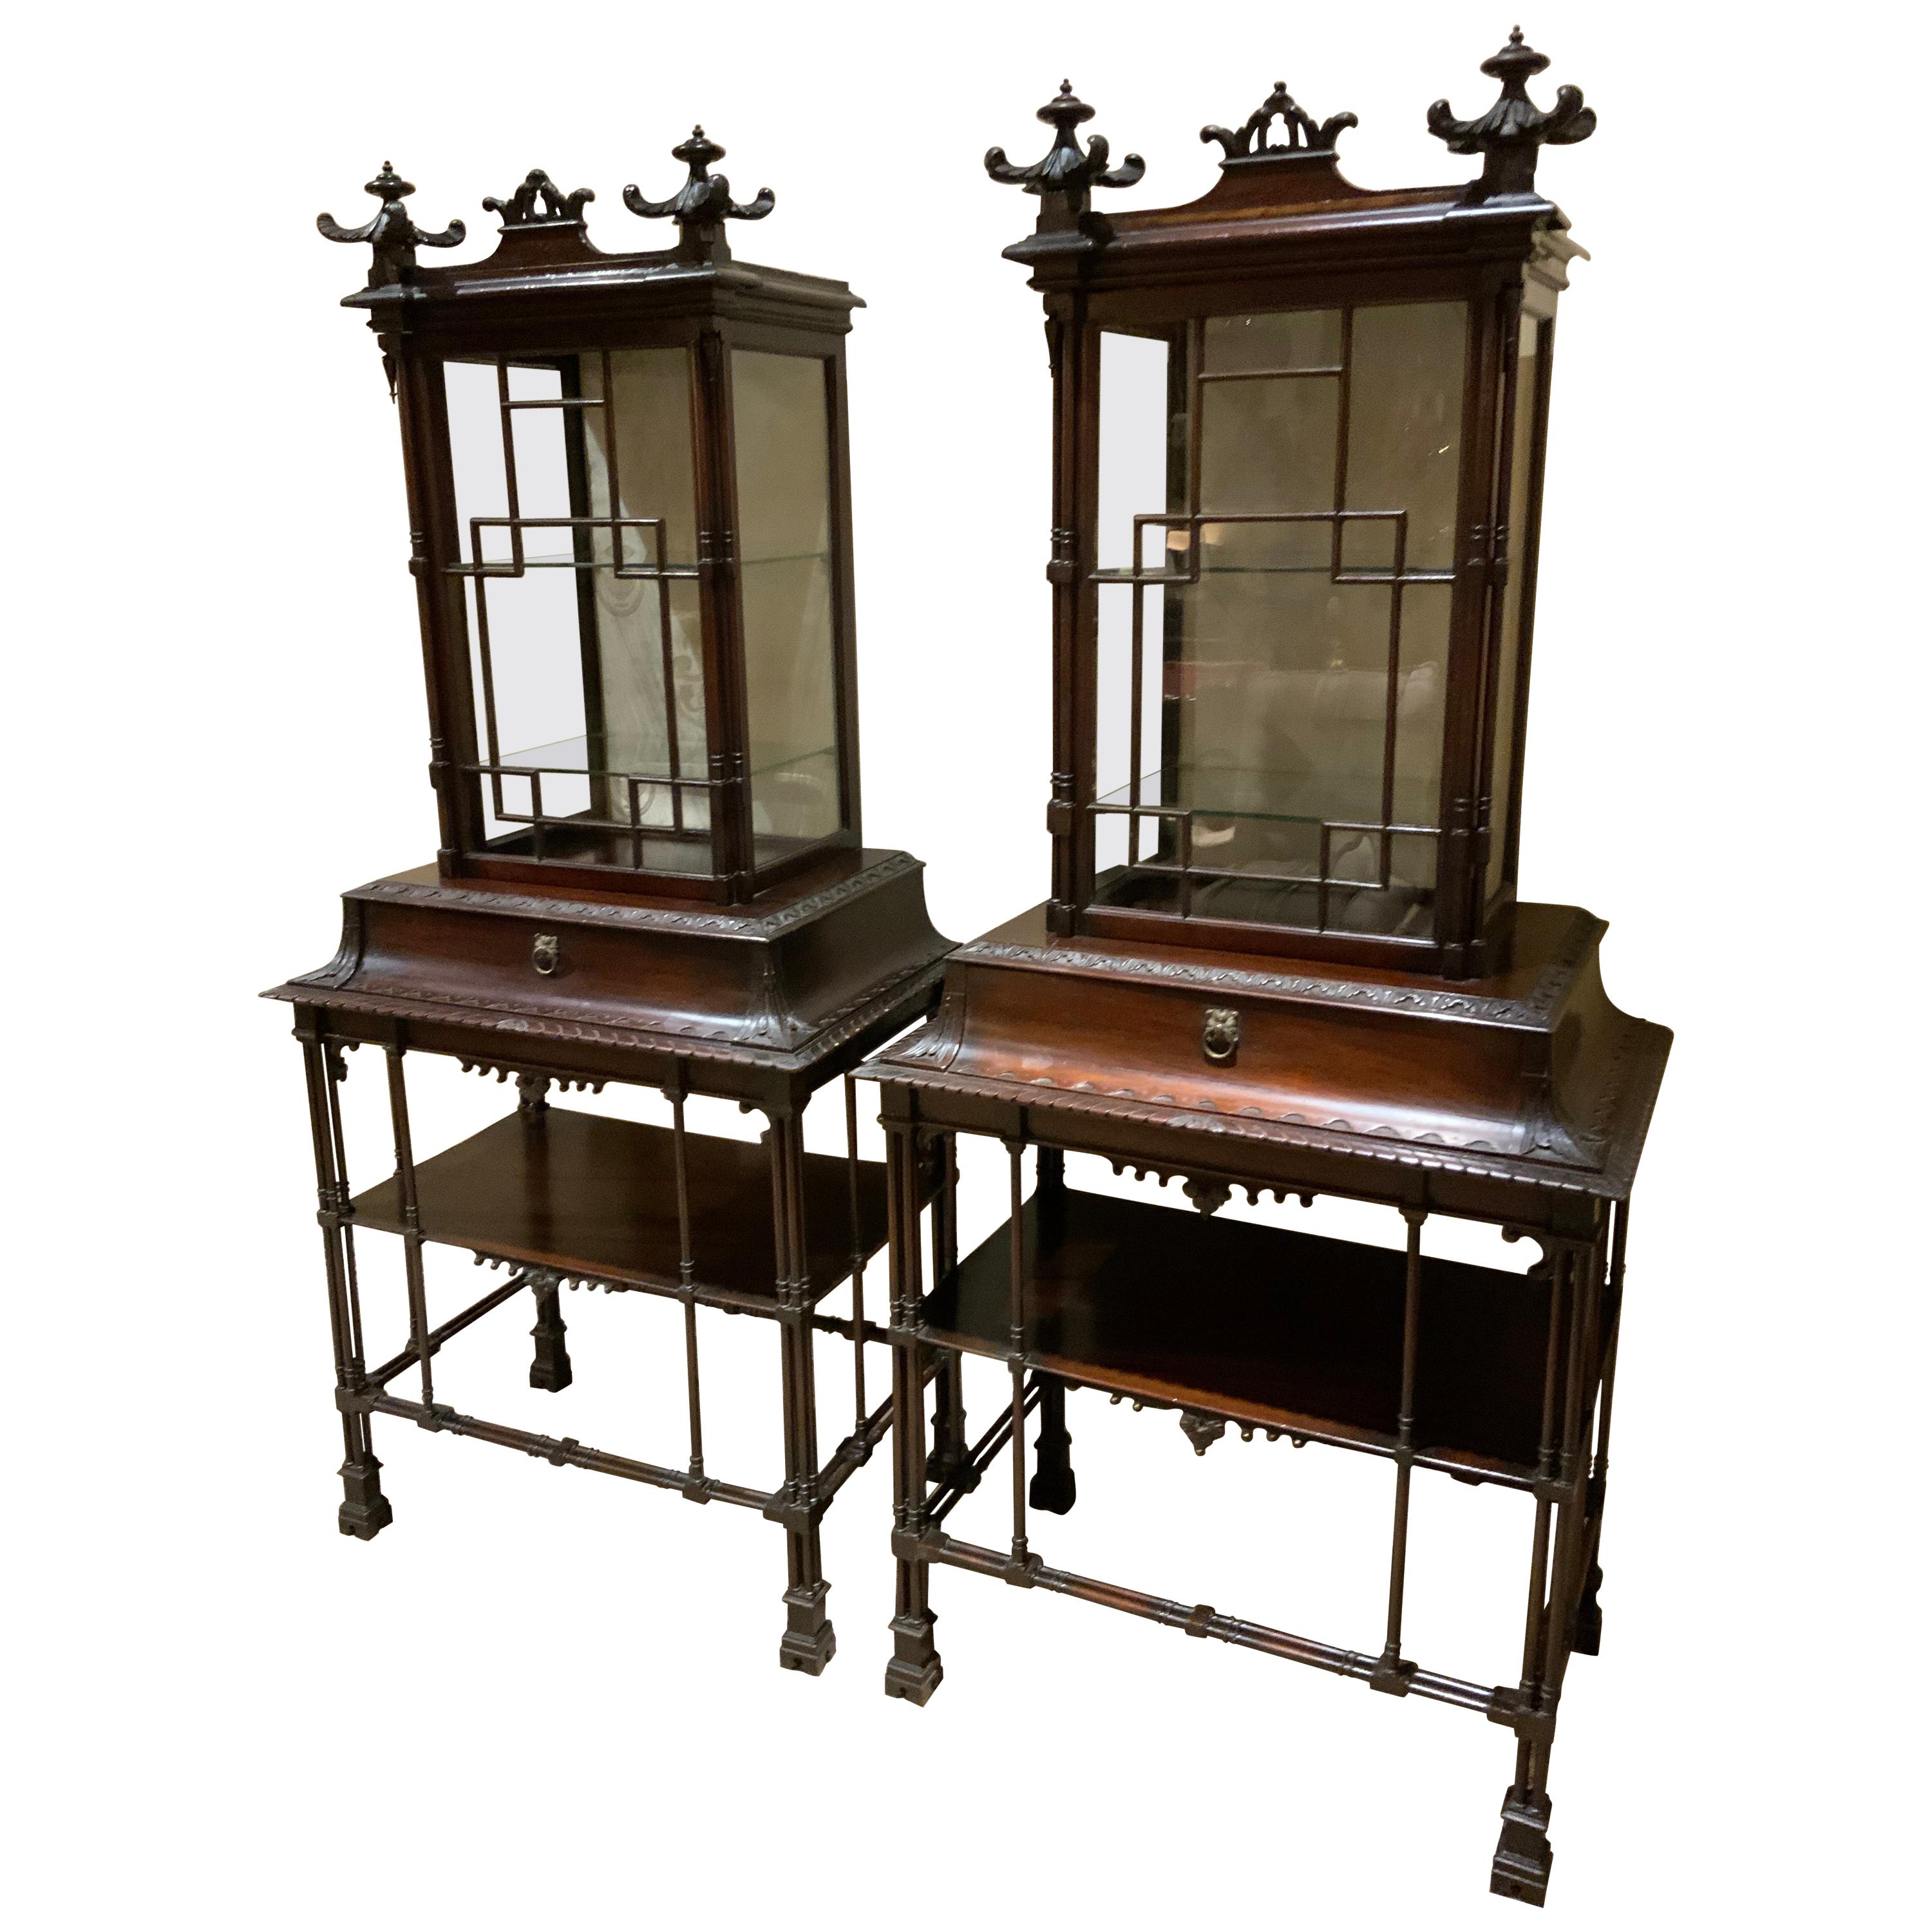 Pair of Exceptional Mahogany Chinese Chippendale Style Display Cabinets, C 1870